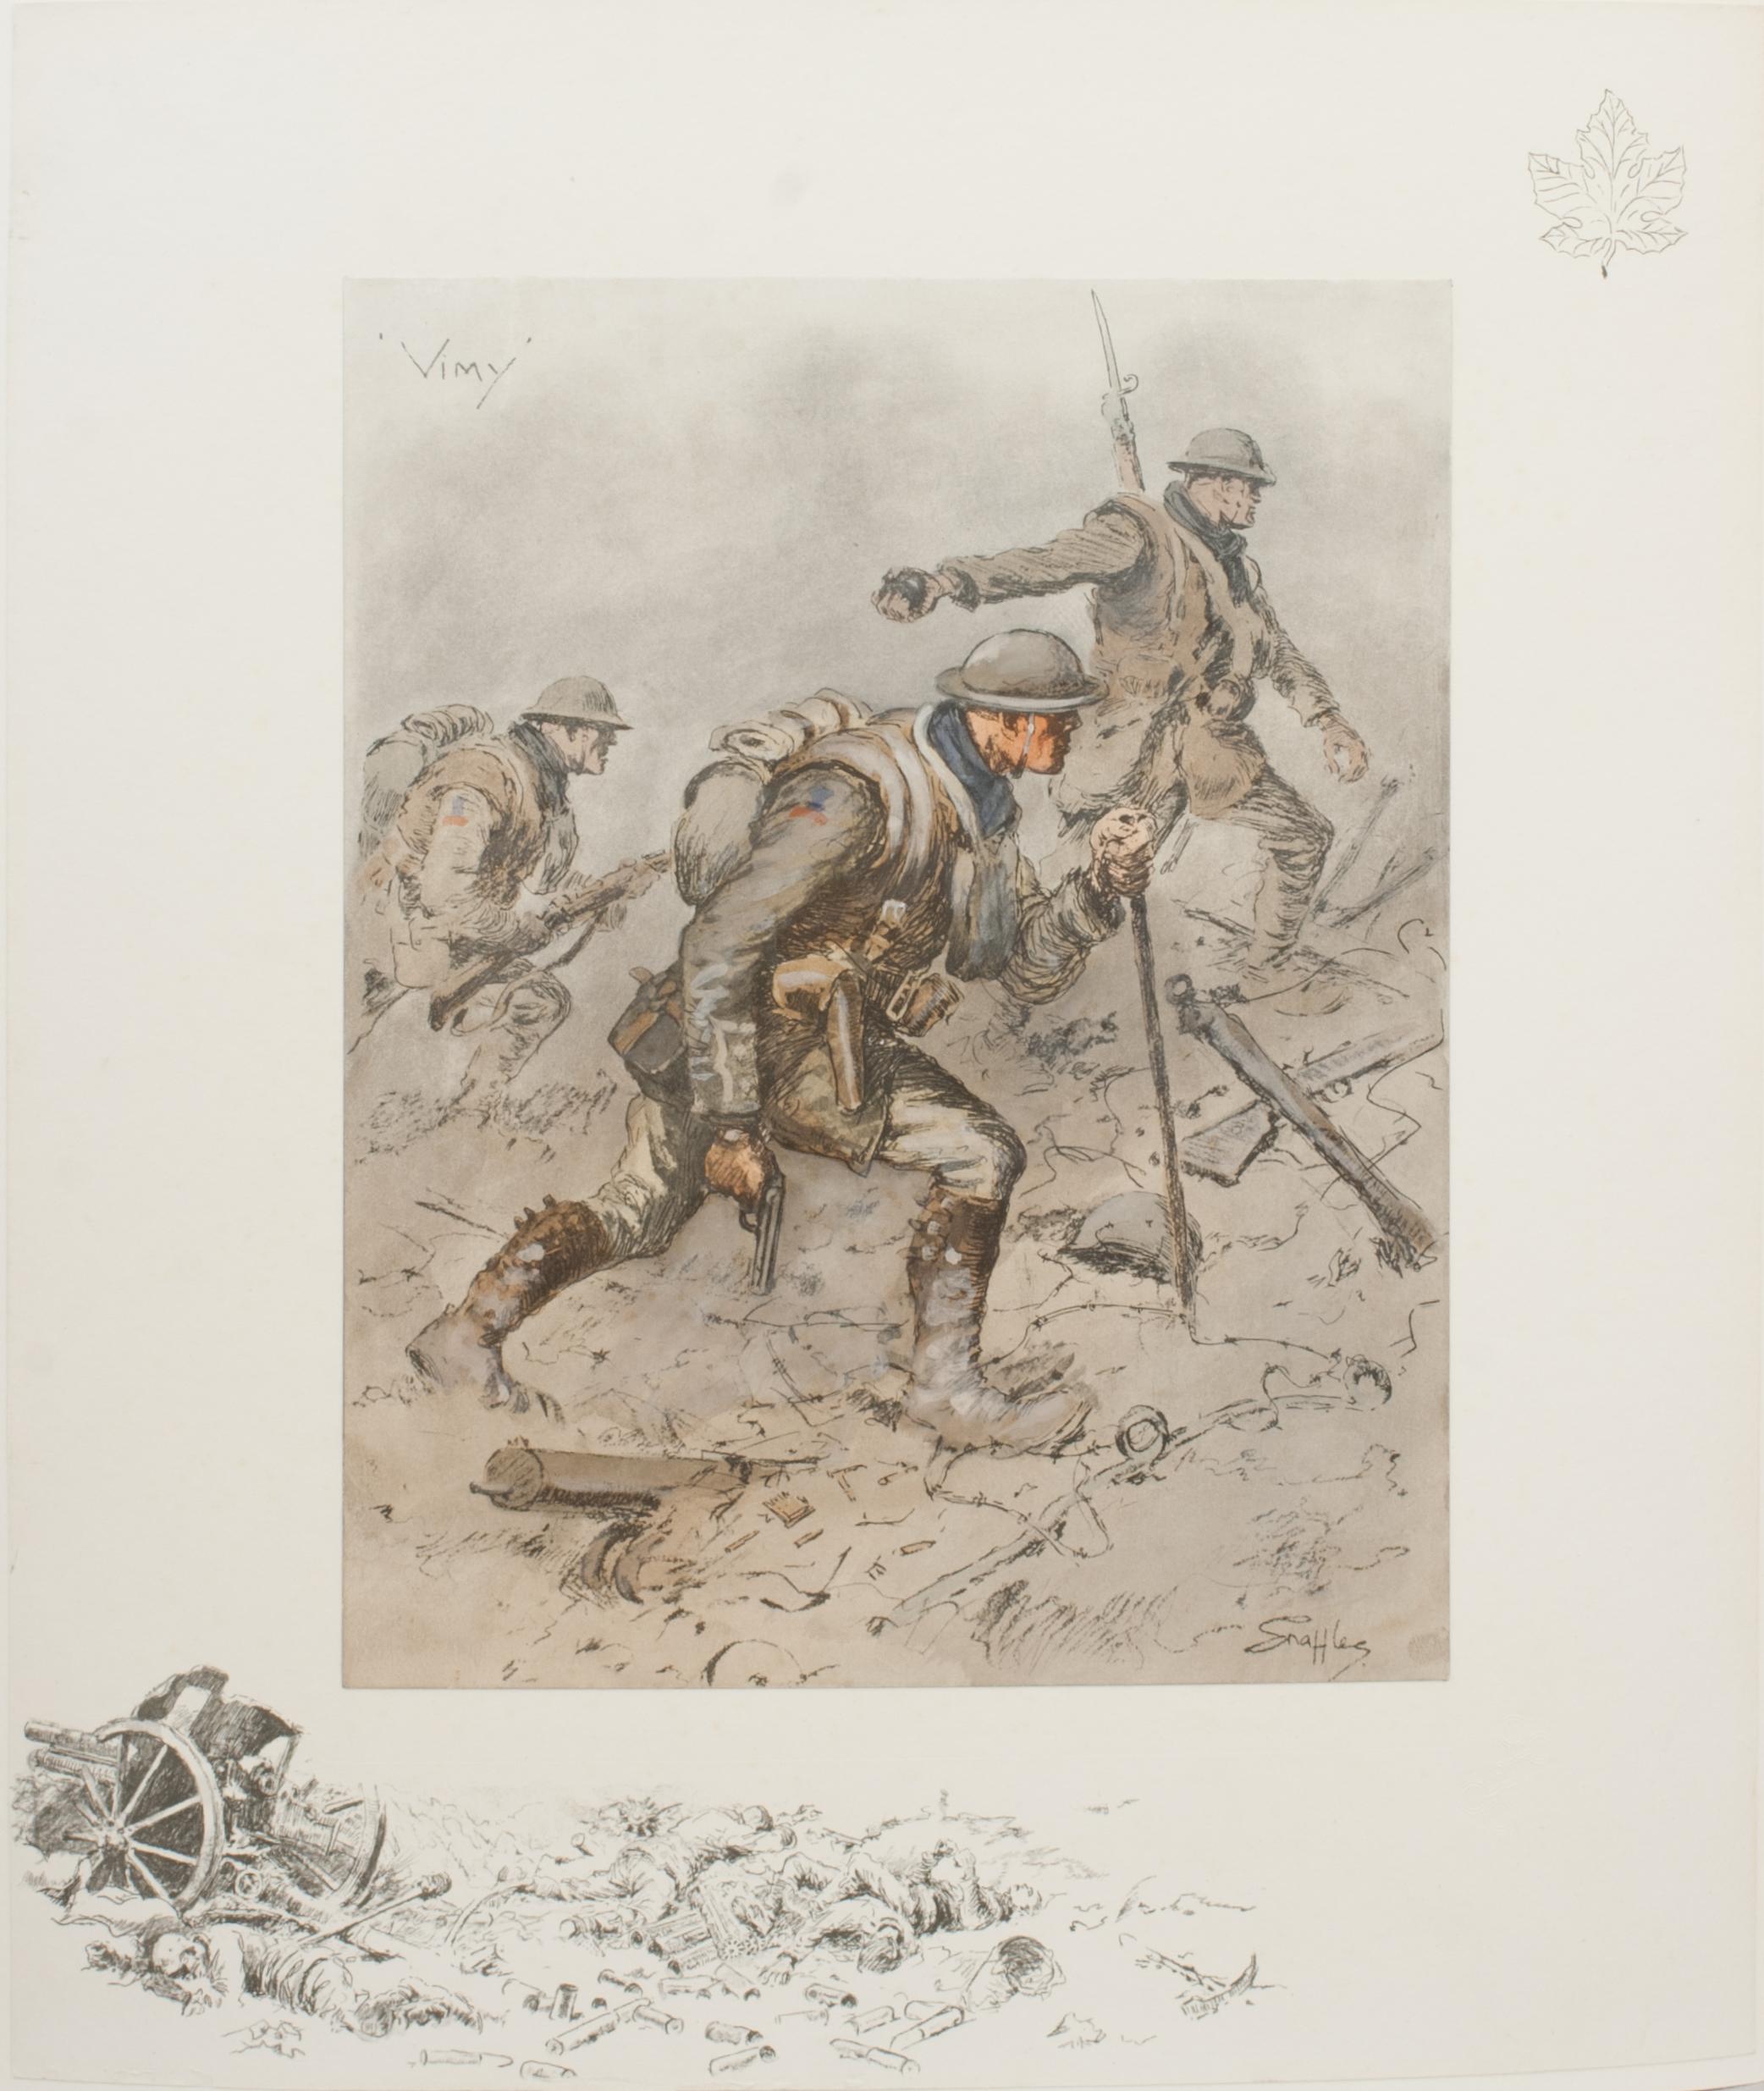 Vintage Snaffles First World War Print, Vimy.
A good Snaffles WWI military print 'Vimy'. The main center colour-piece hand coloured lithograph is mounted onto the printed remarque board. The Snaffles picture shows an officer leading an advance from